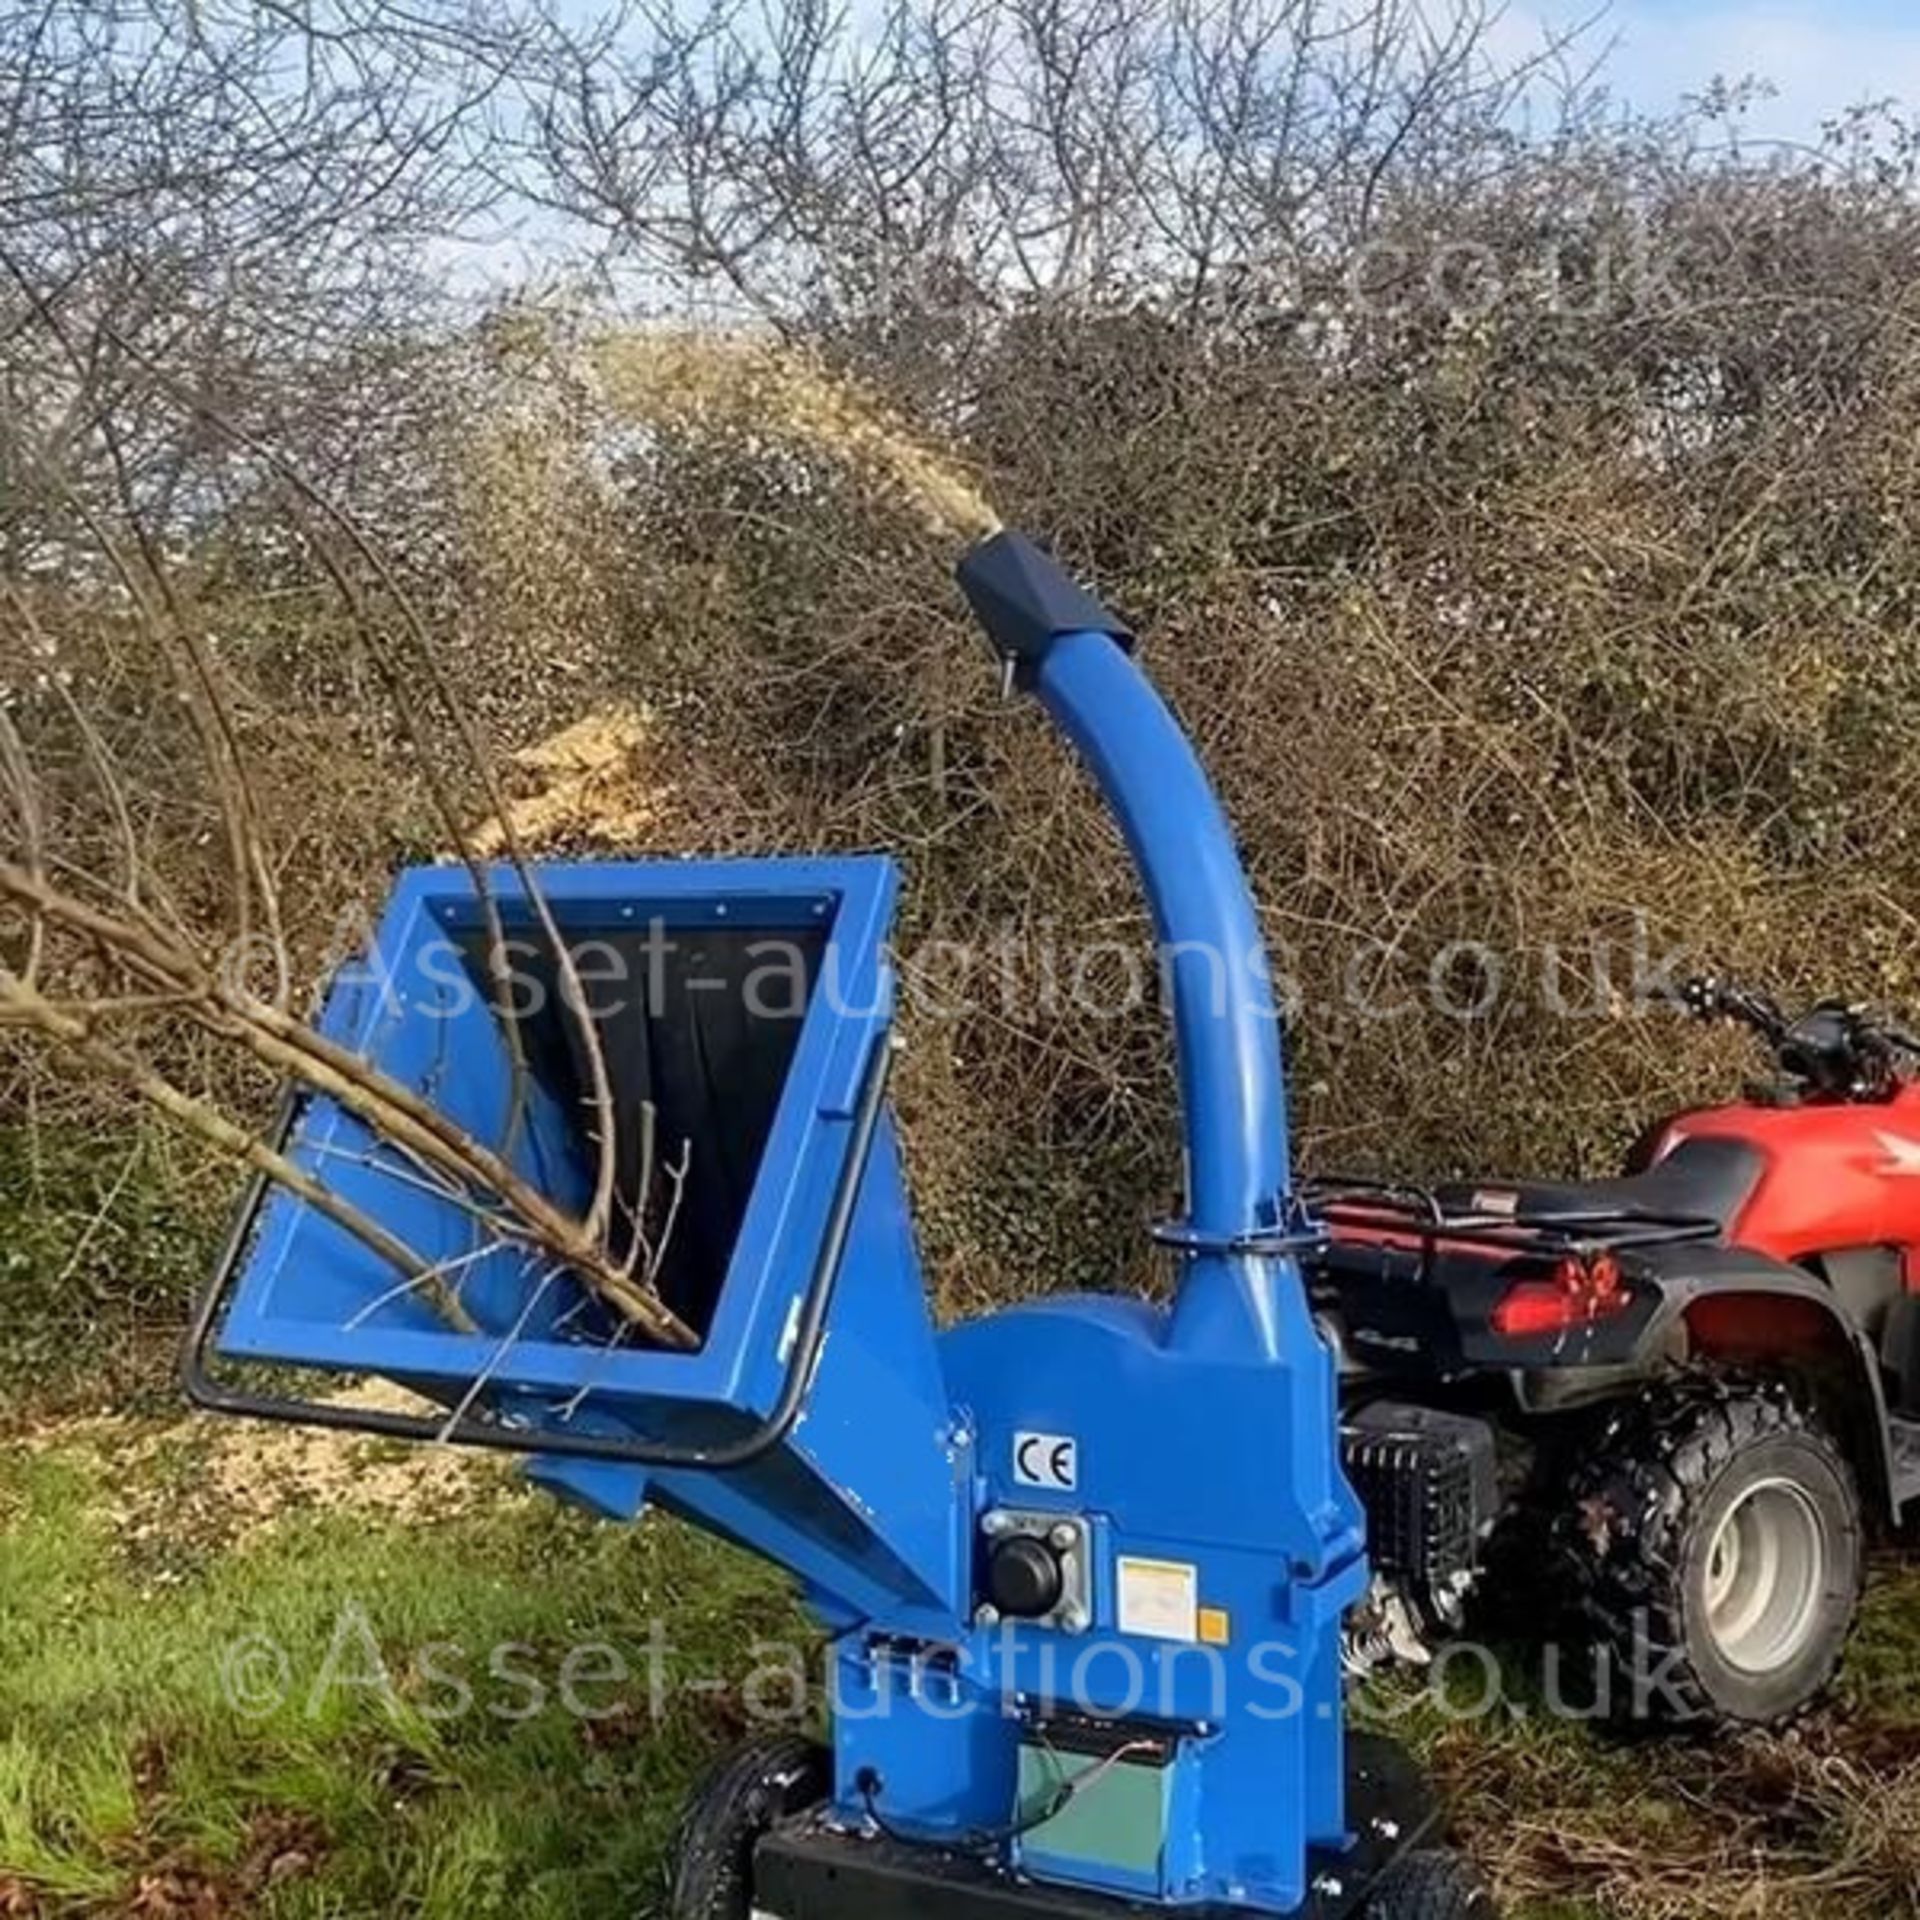 NEW AND UNUSED 15100TE 420cc 4.5" TOWABLE PETROL WOOD CHIPPER, RRP OVER £2400 *PLUS VAT* - Image 9 of 10